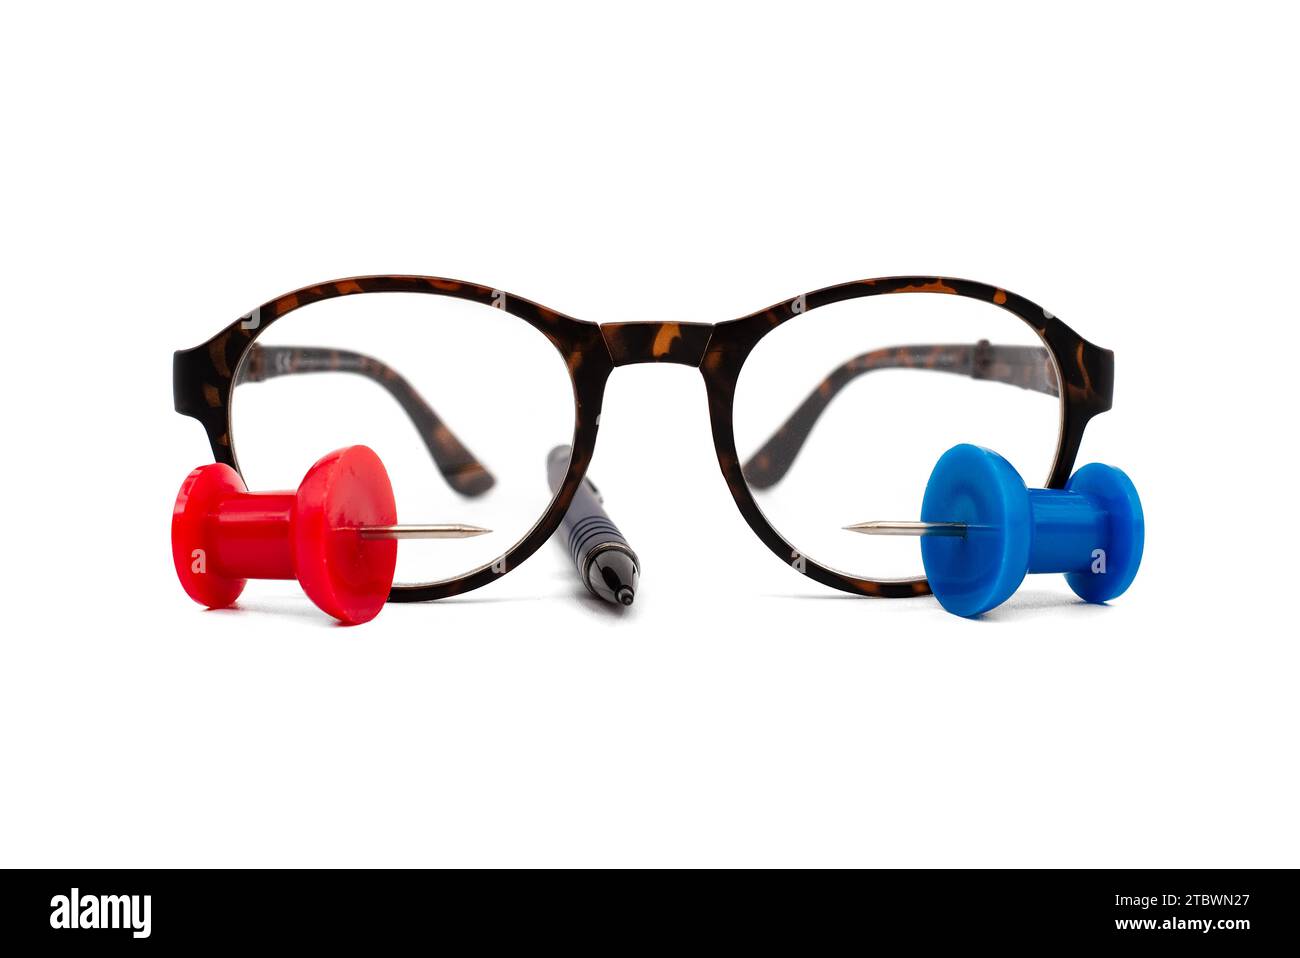 Reading glasses with tortoiseshell frames, pen and colorful red and blue thumb tack over a white background with copy space in a business still life Stock Photo